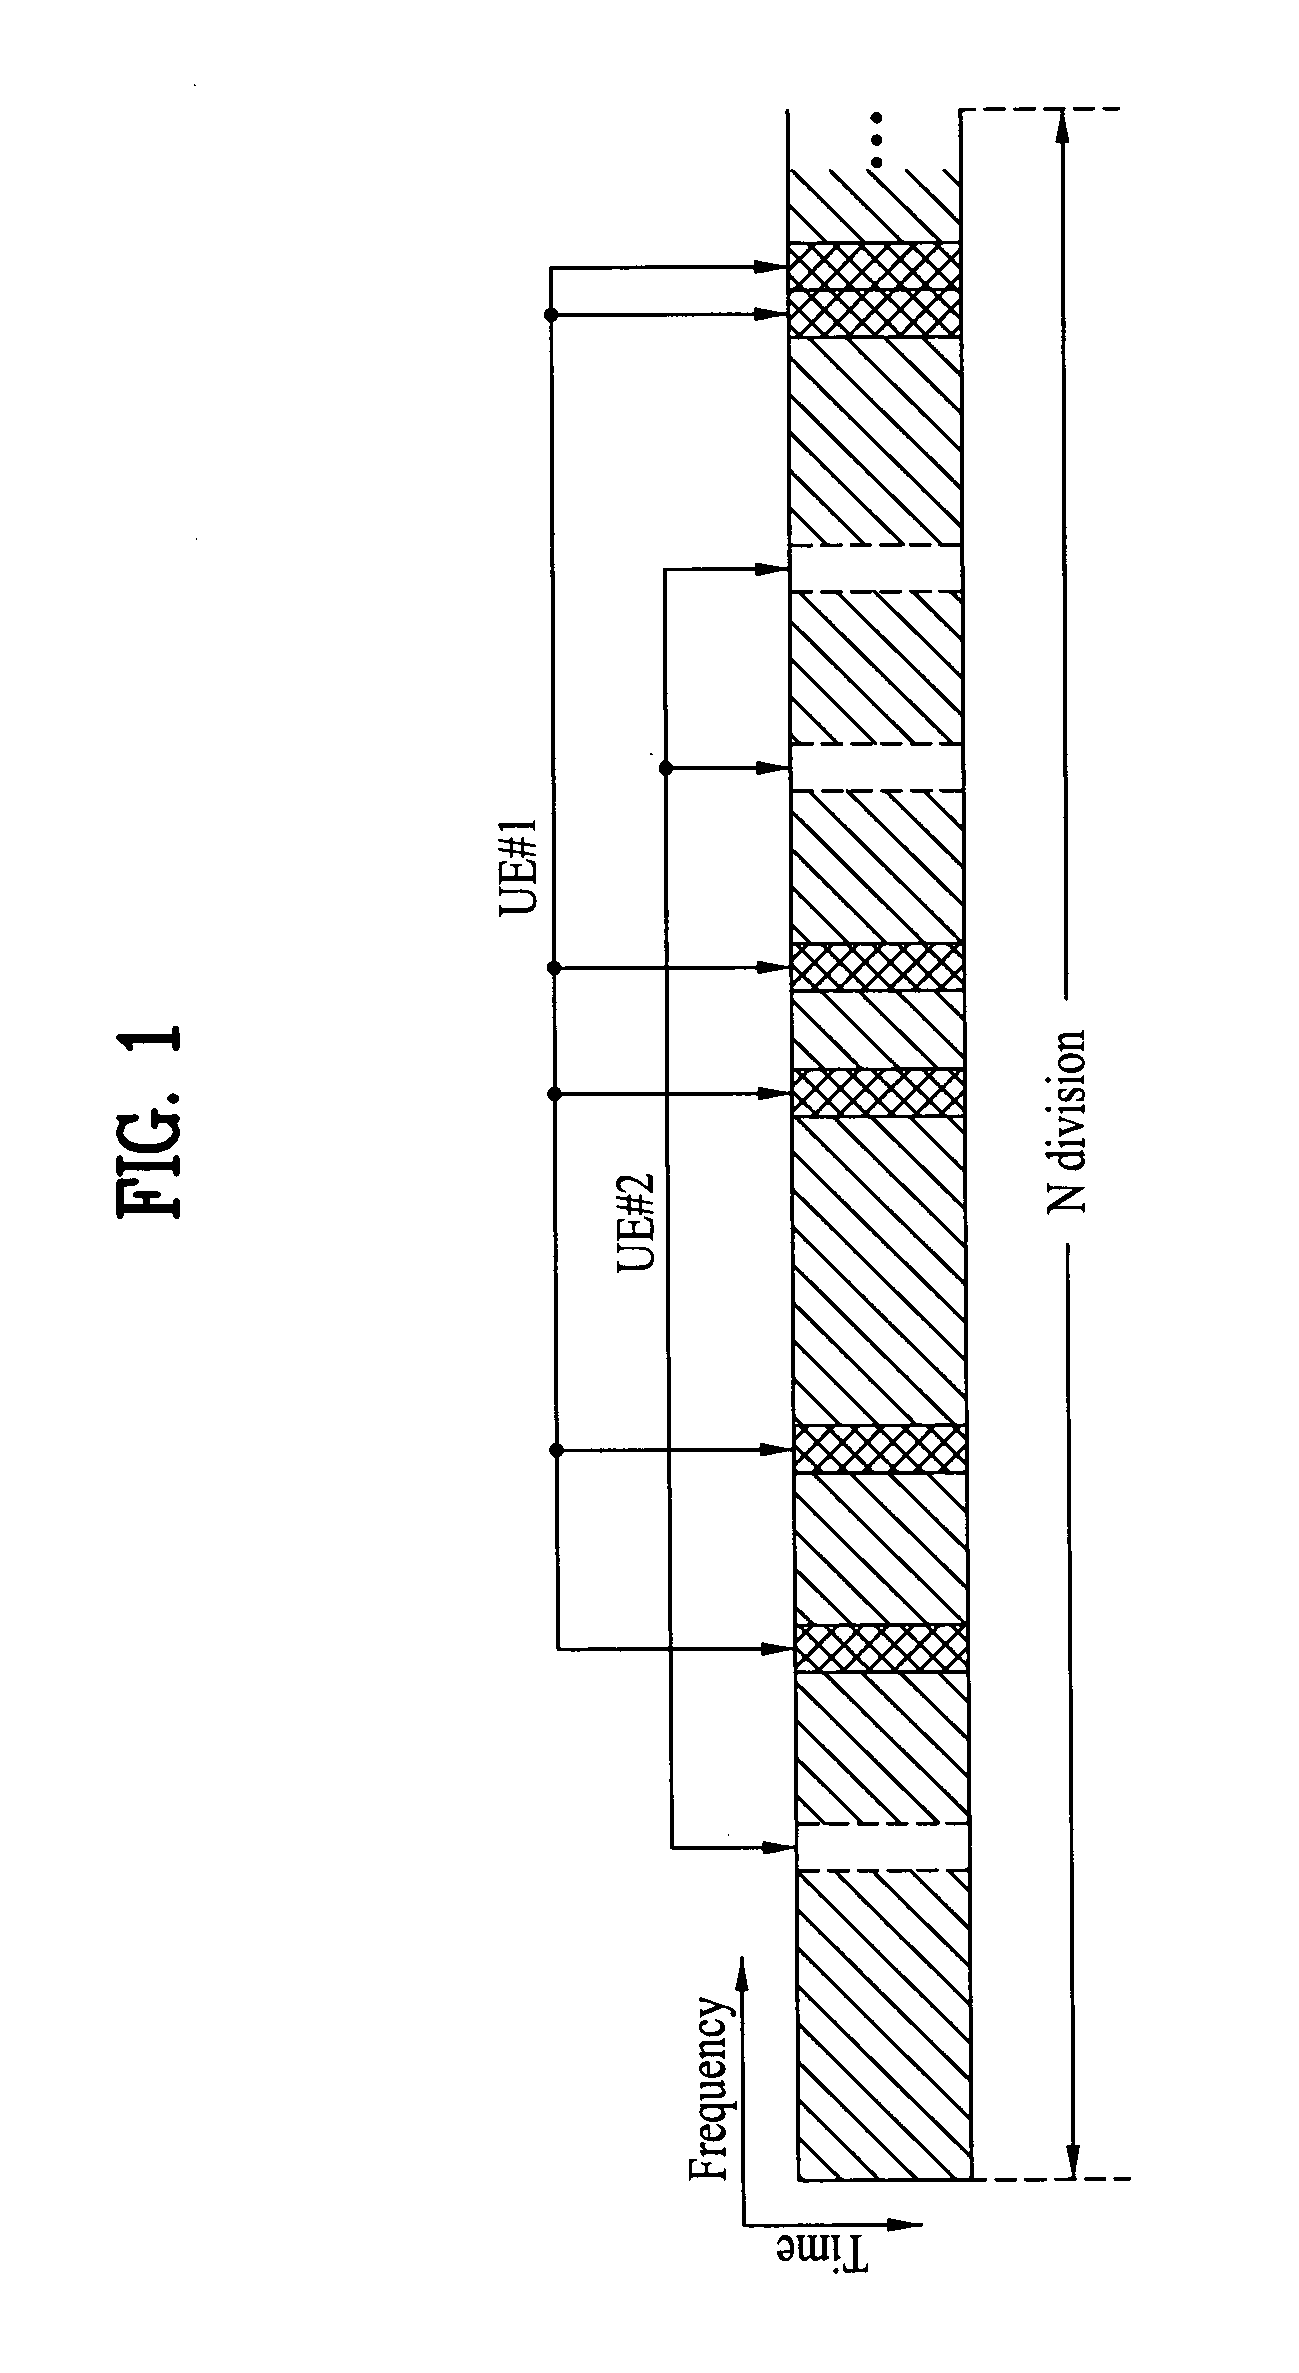 Method for allocating resource, and method for transmitting resource allocation information